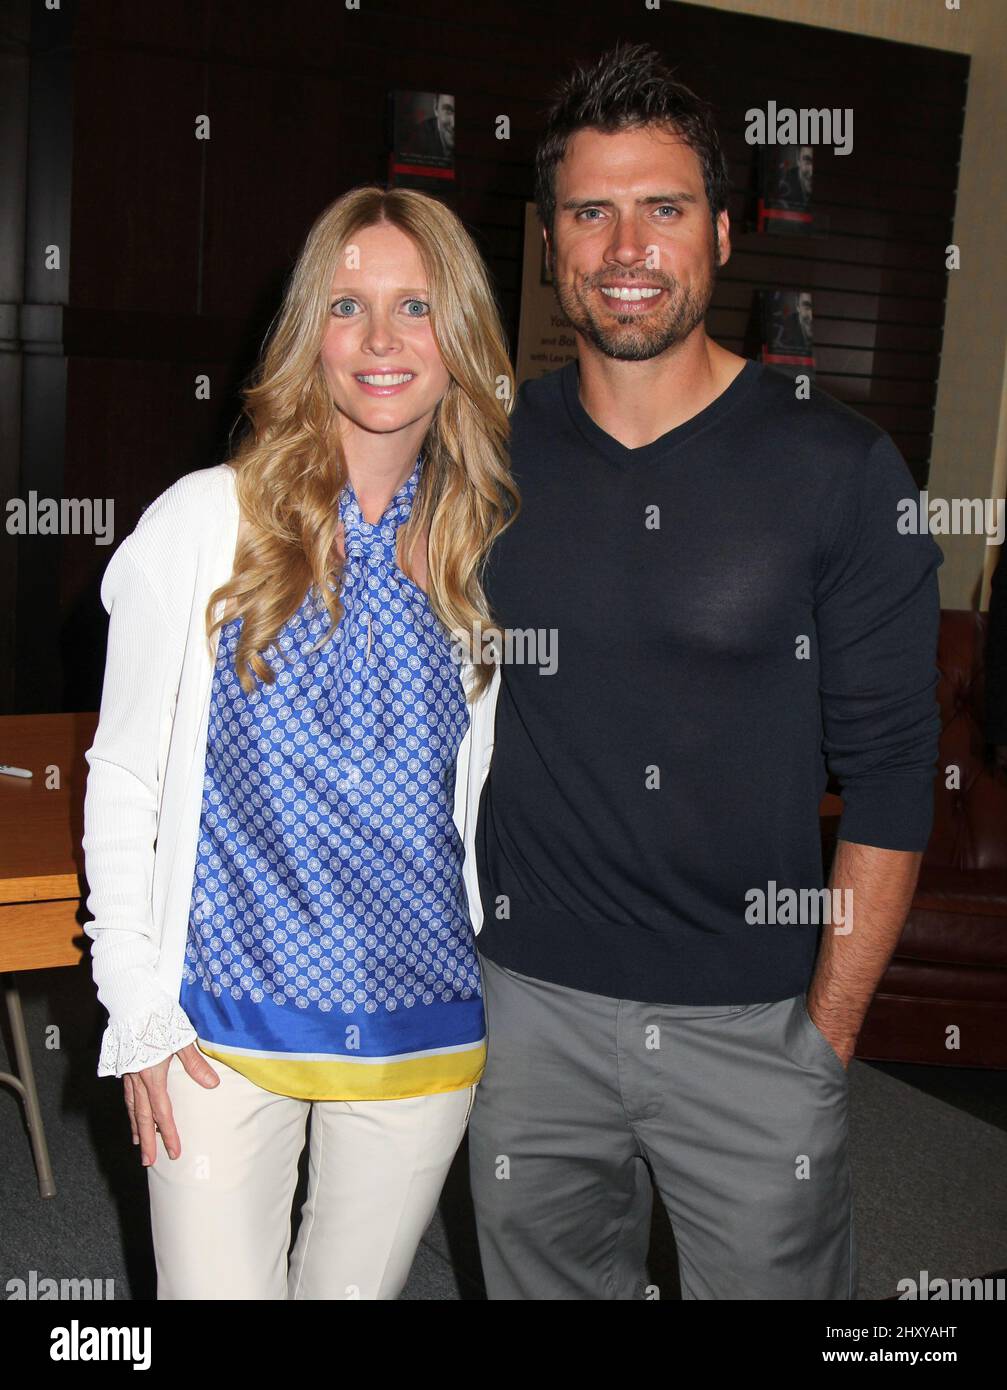 Lauralee Bell and Joshua Morrow attend 'The Young and Restless Life of William J. Bell' book signing held at Barnes & Noble The Grove, June 21, 2012 Los Angeles, Ca. Stock Photo